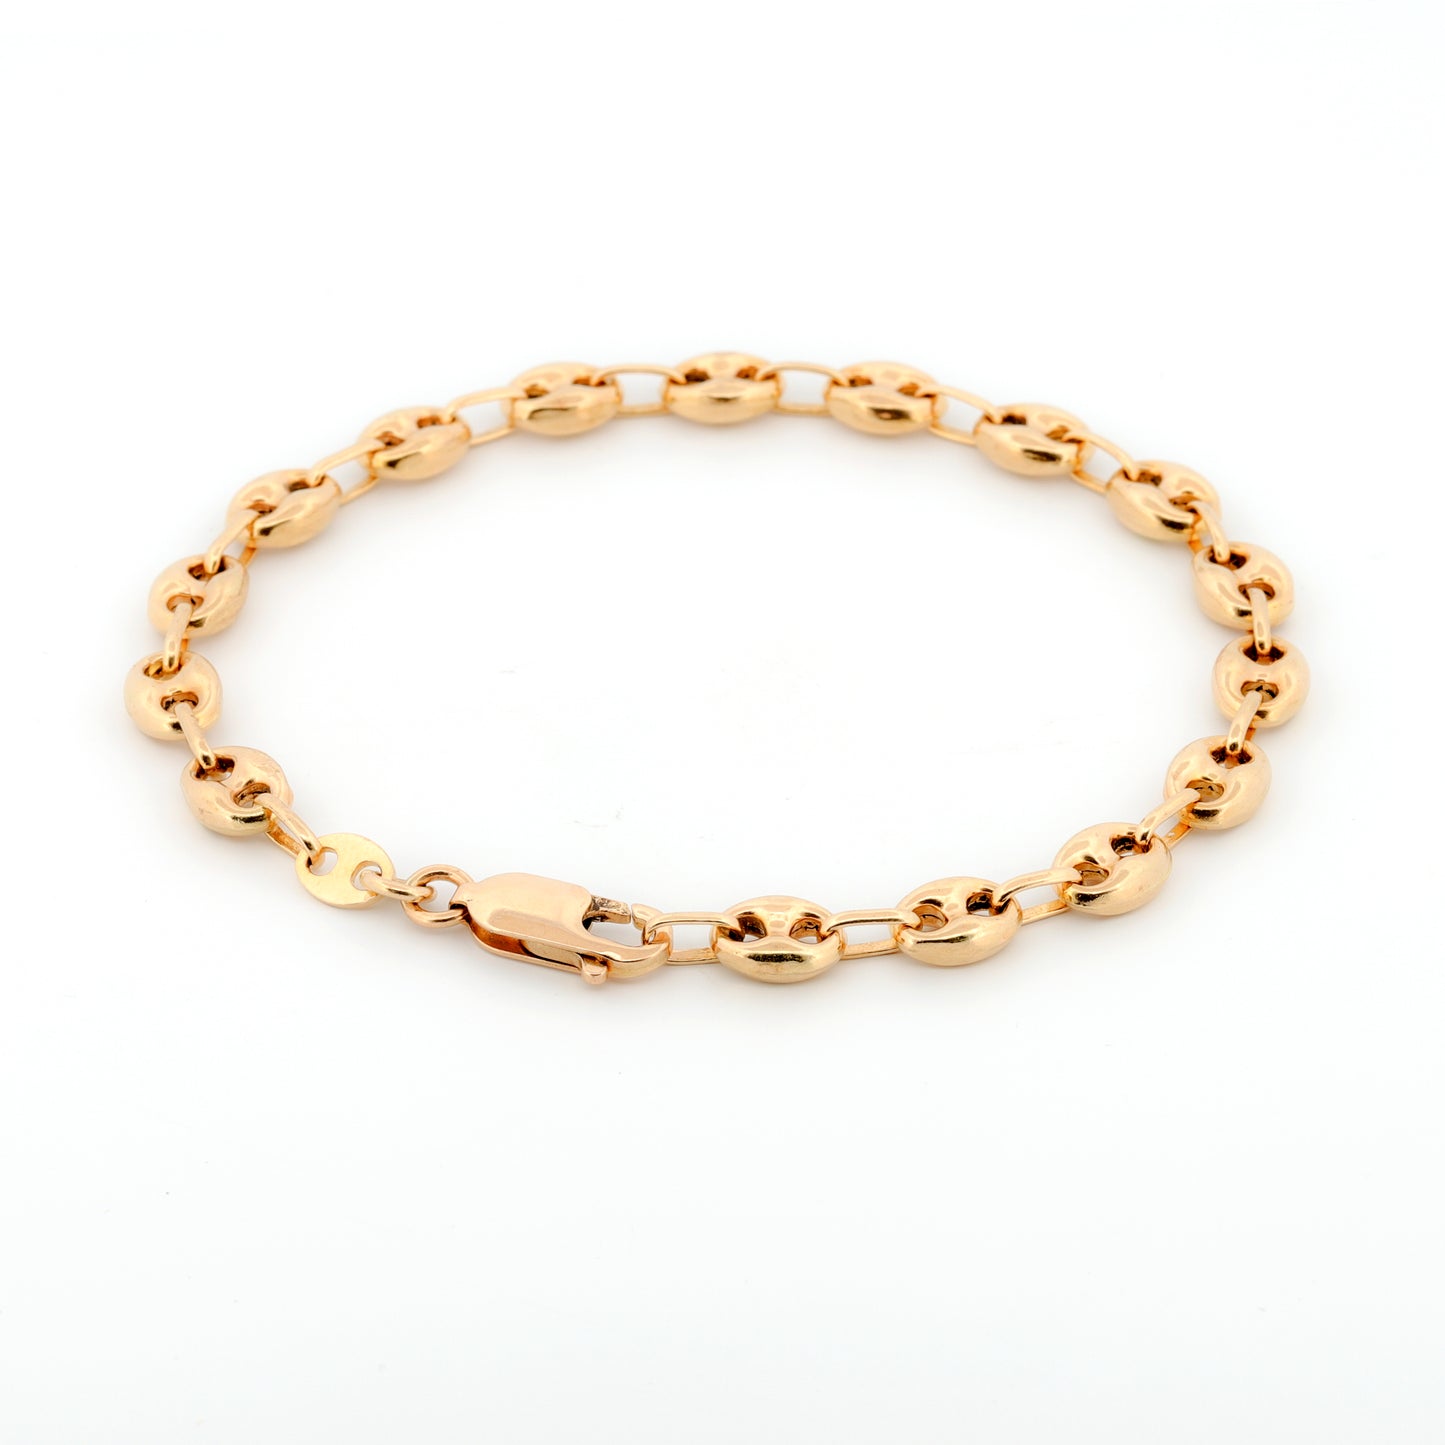 Mariier's Puff "Gucci" Link 6mm Chain Bracelet in 14k Yellow Gold